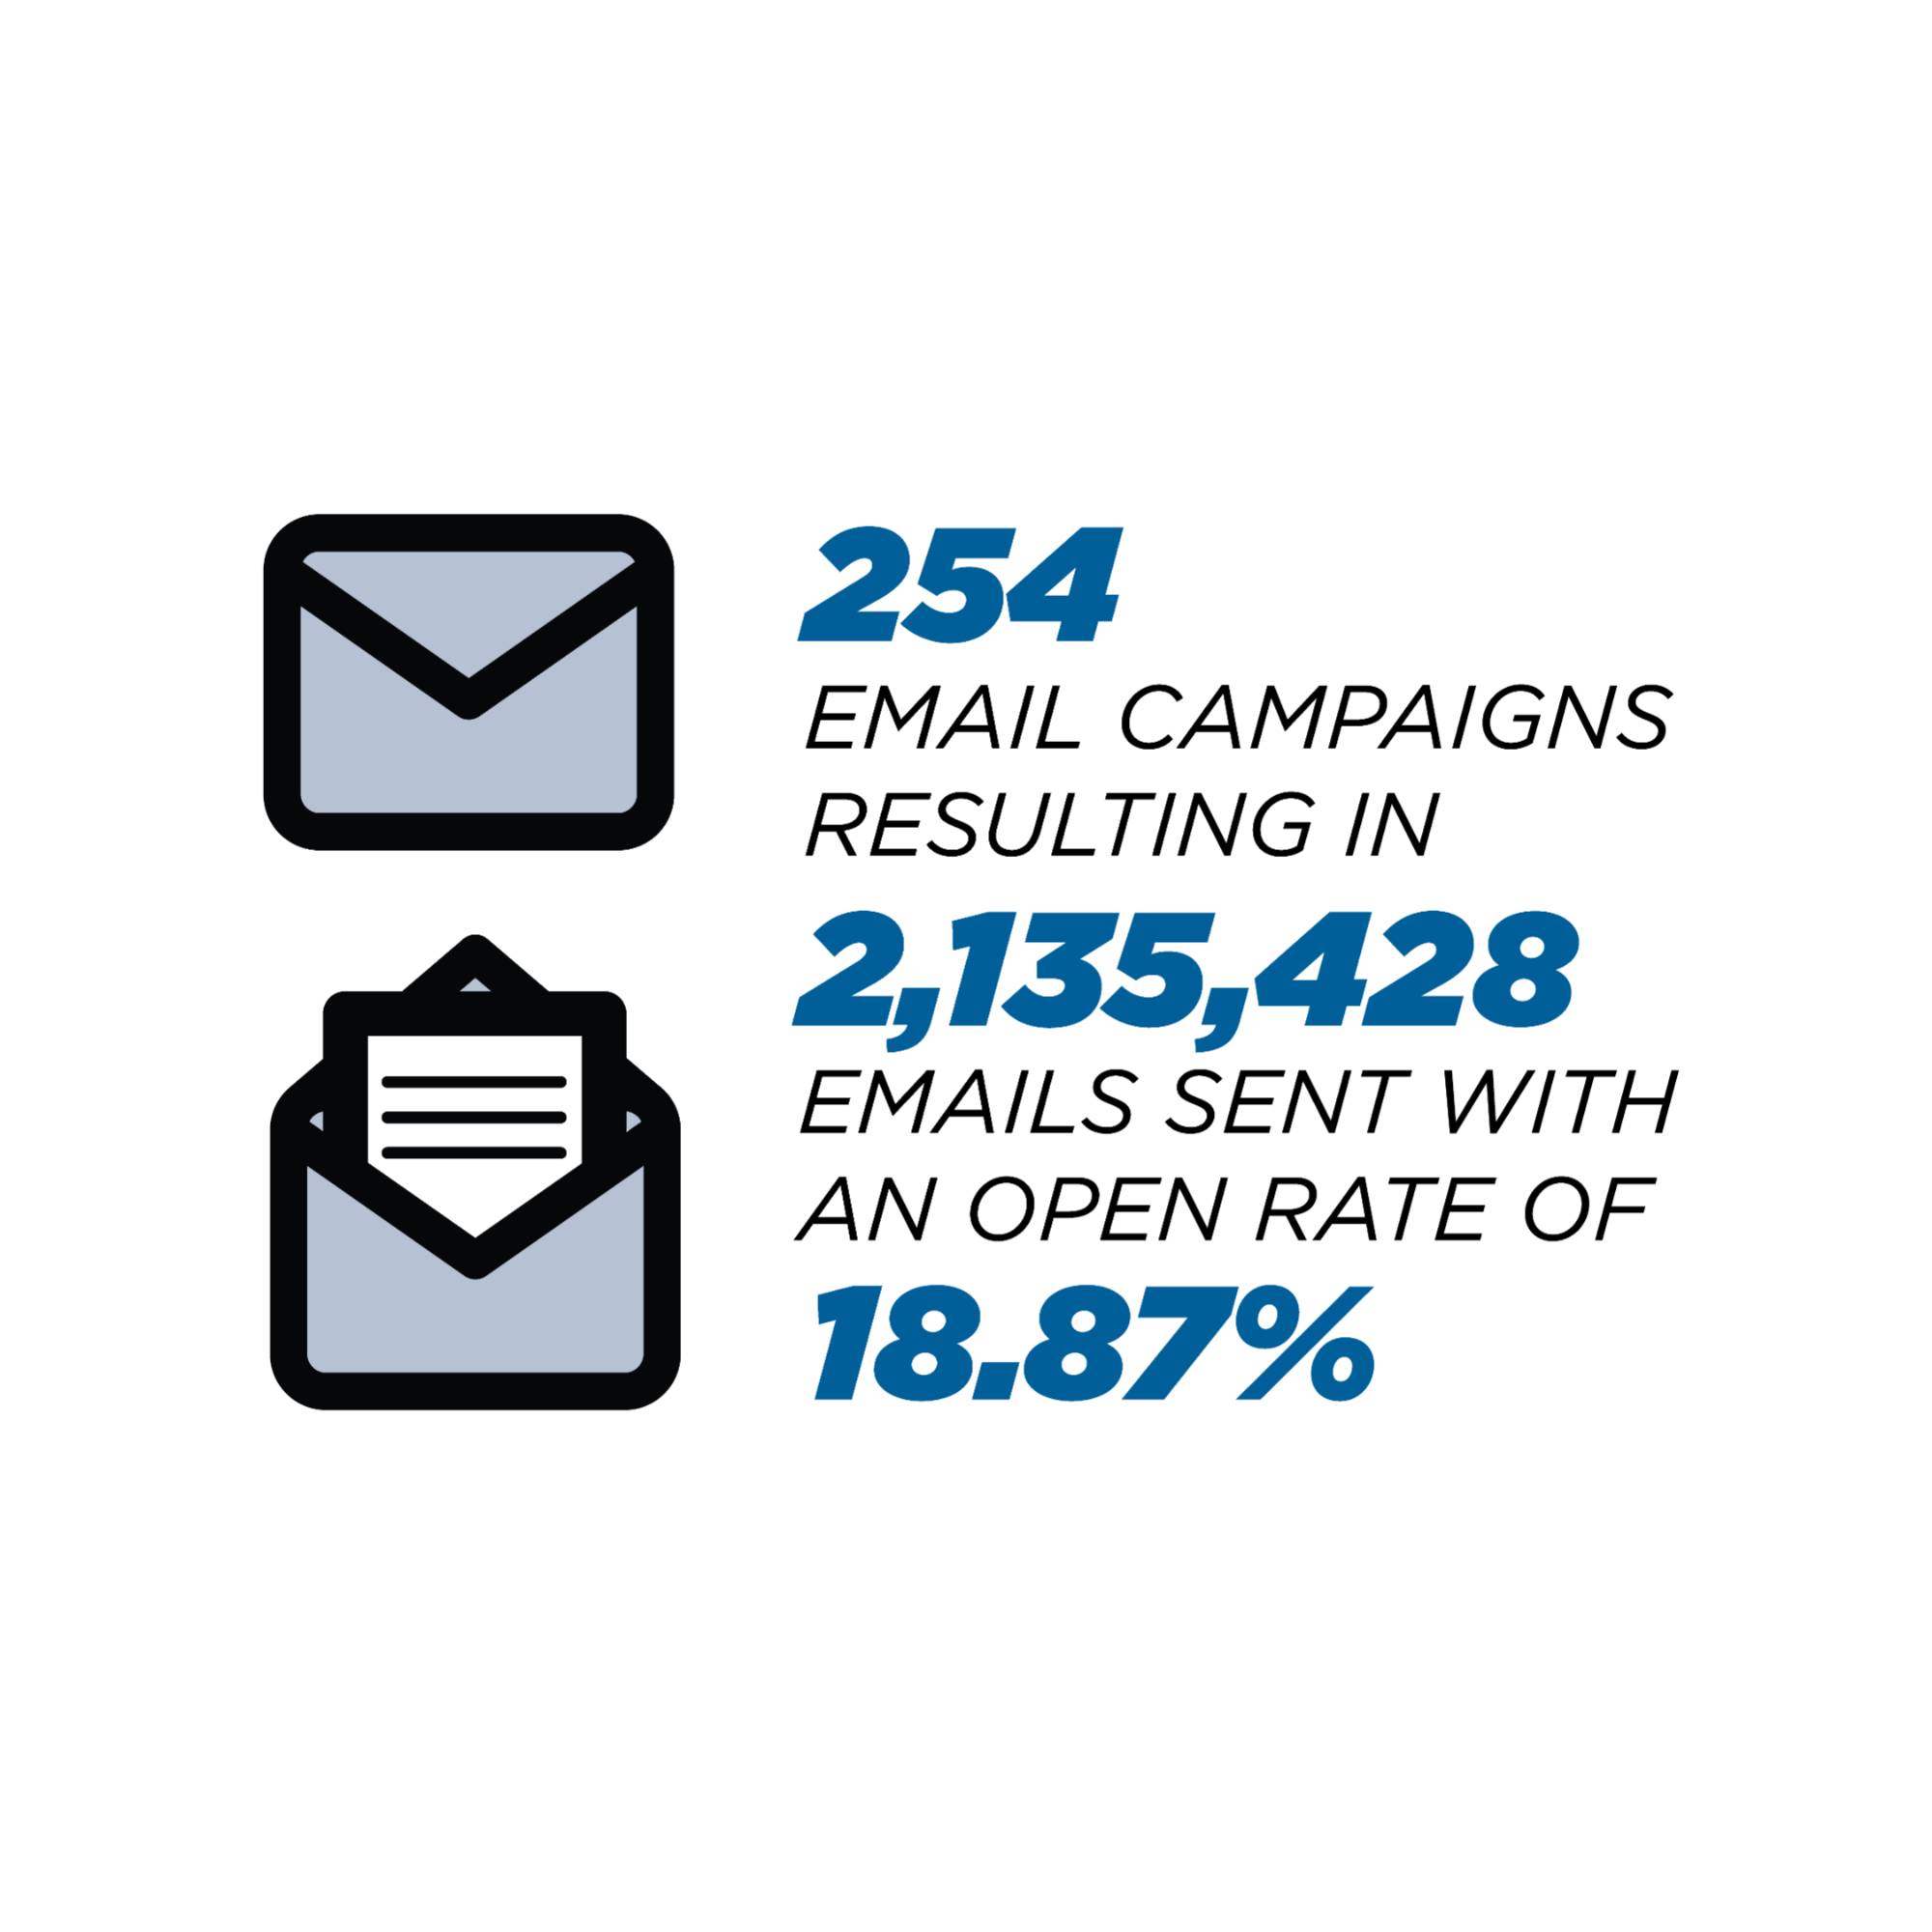 254 email campaigns resulting in 2,135,428 emails sent with an open rate of 18.87%